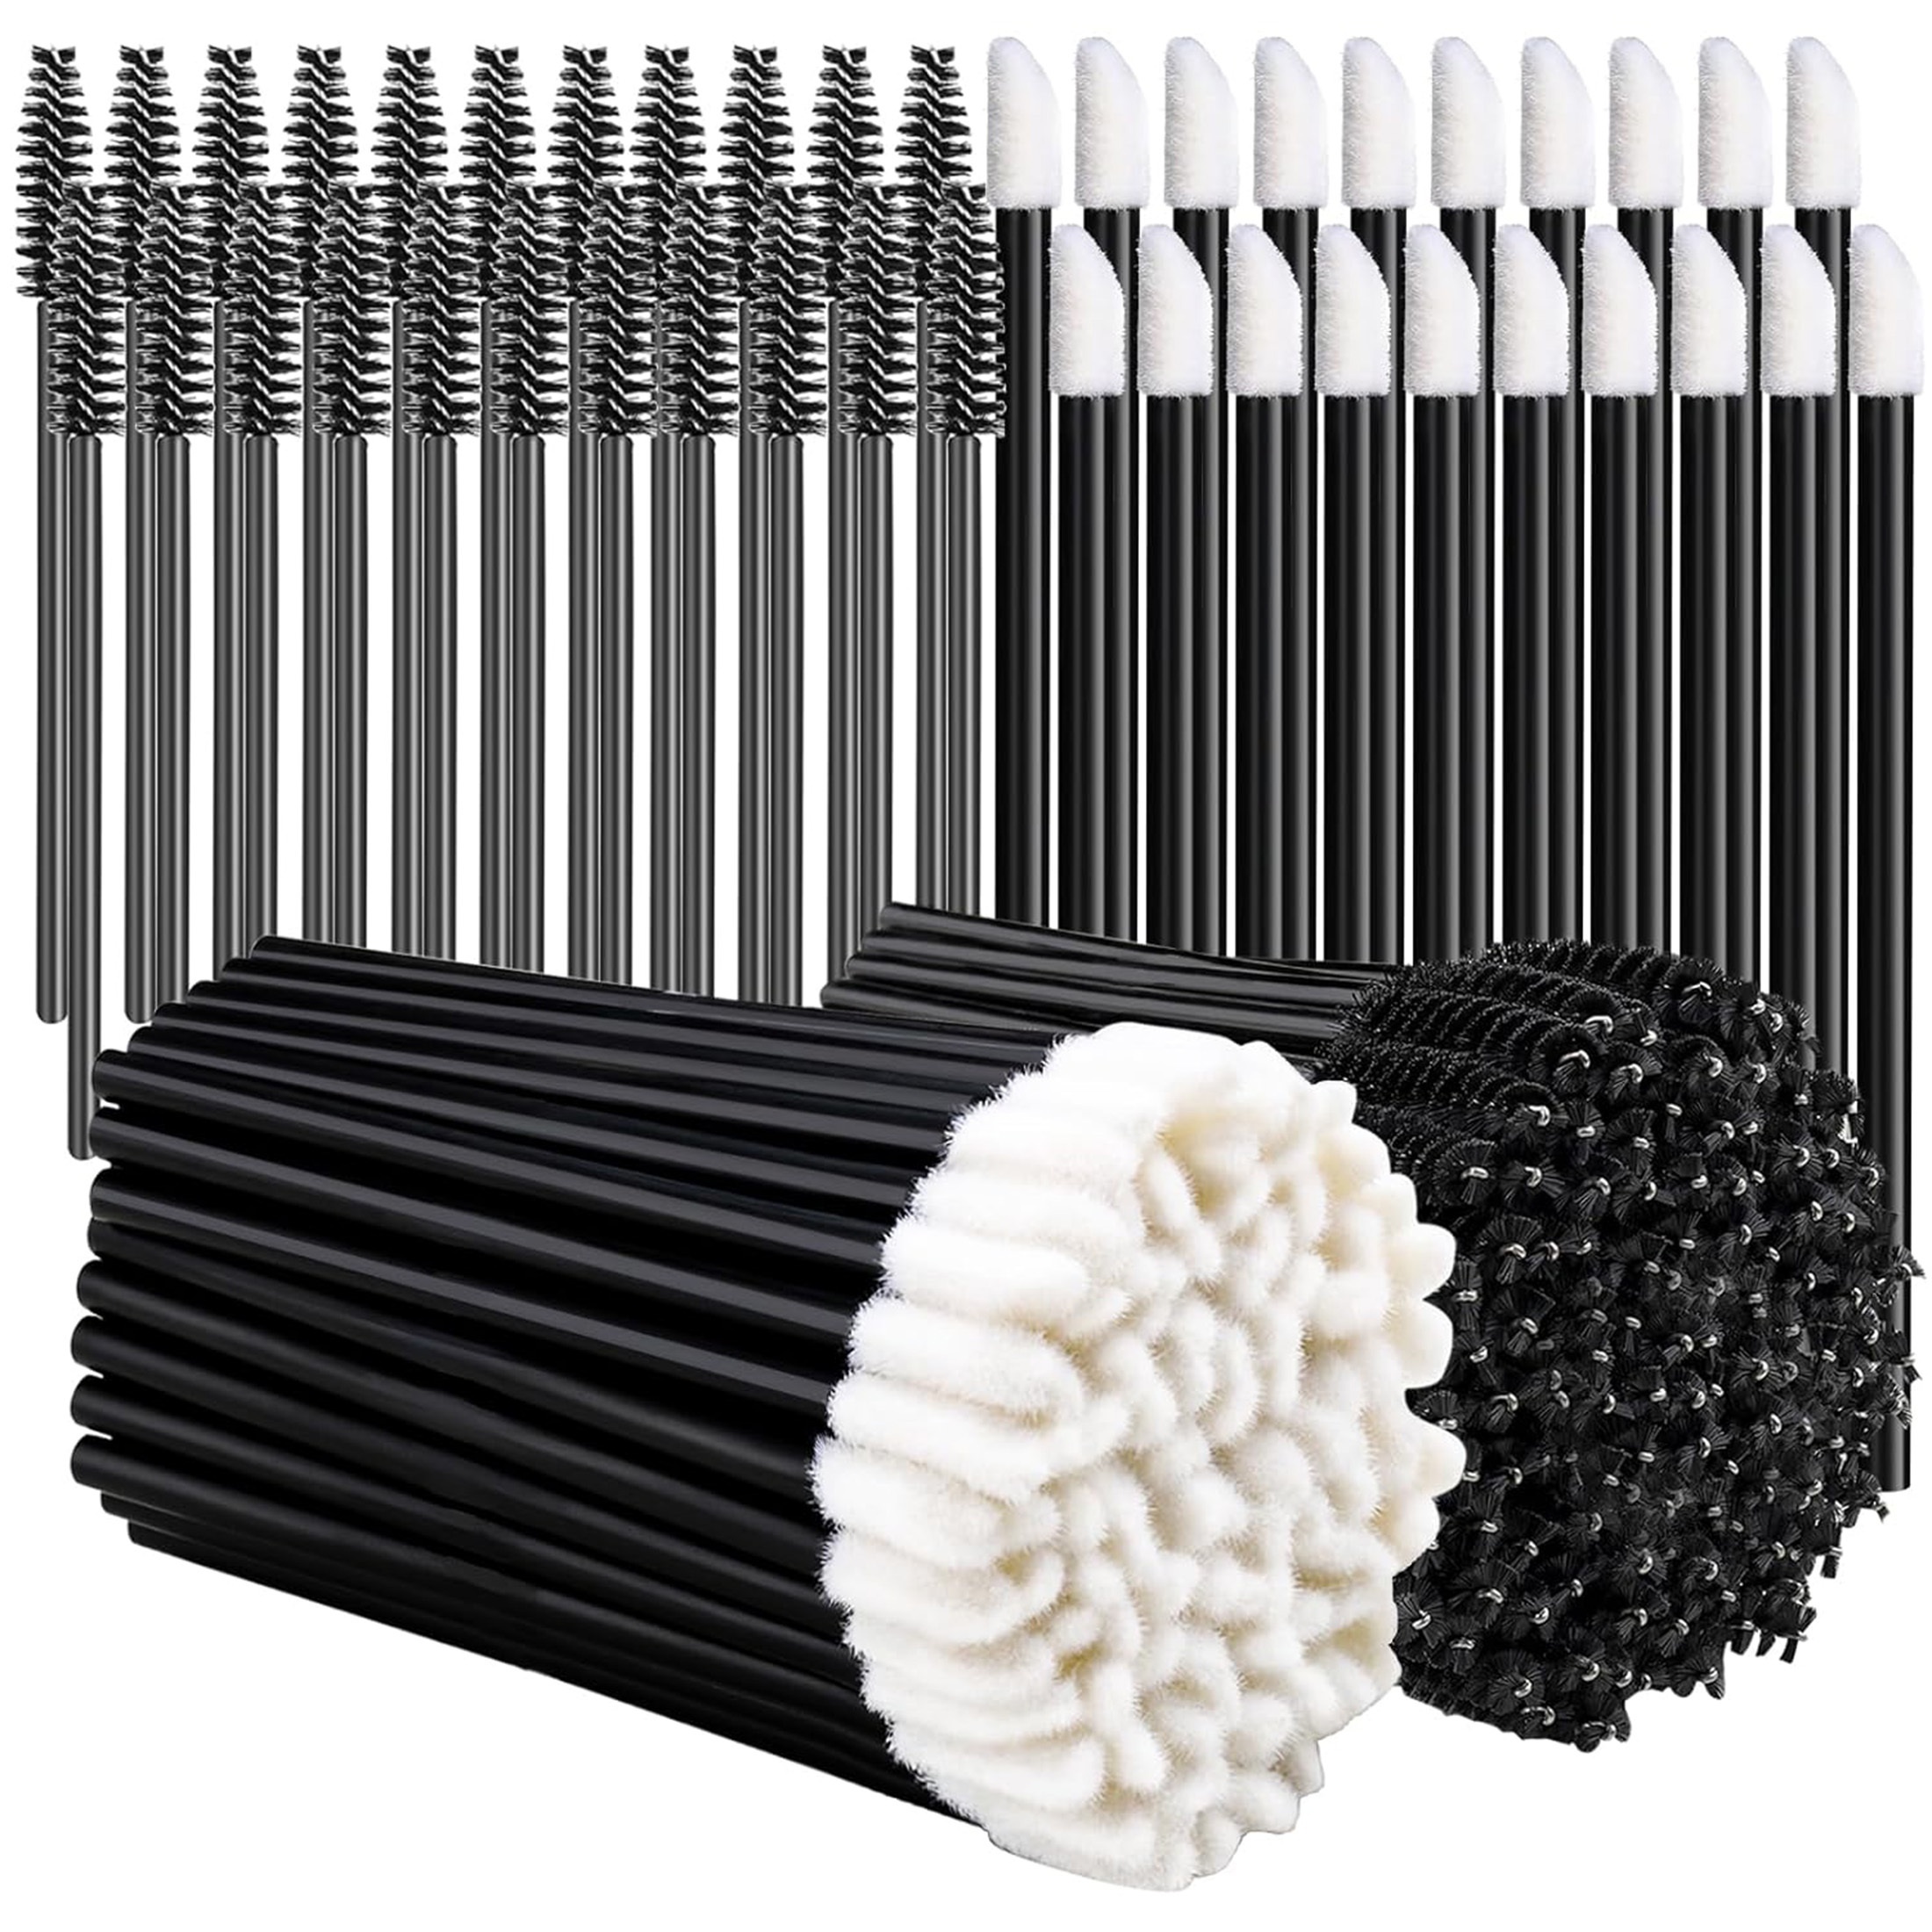 

100pcs Disposable Mascara Wands Set With Lip Gloss Applicators, Nylon Bristle Brushes For Normal Skin, Unscented Palm Brush With Abs Plastic Rods